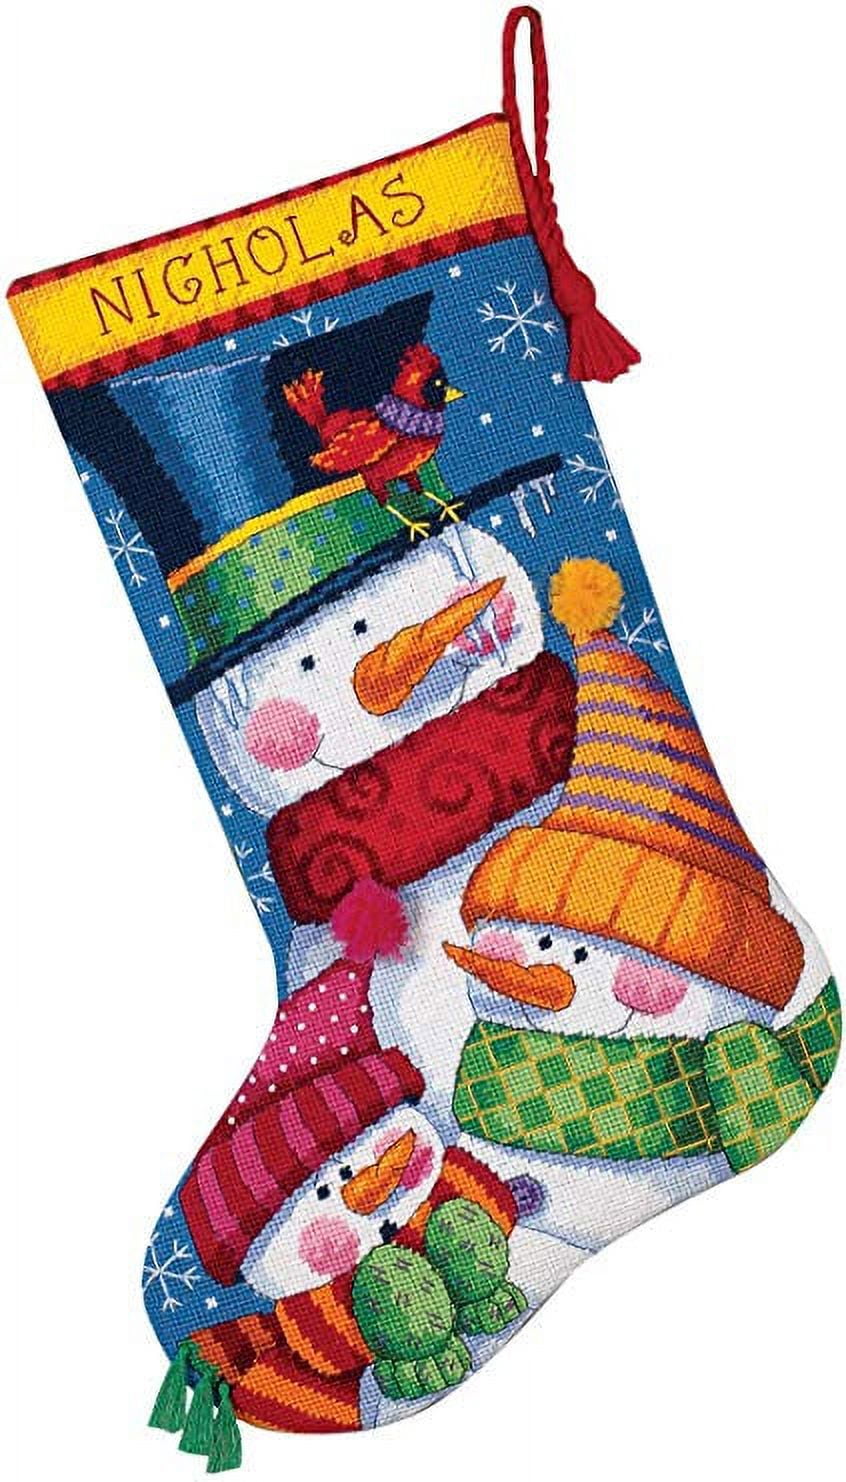 Dimensions Counted Cross Stitch Kit 16 Long-Snowman Family Stocking